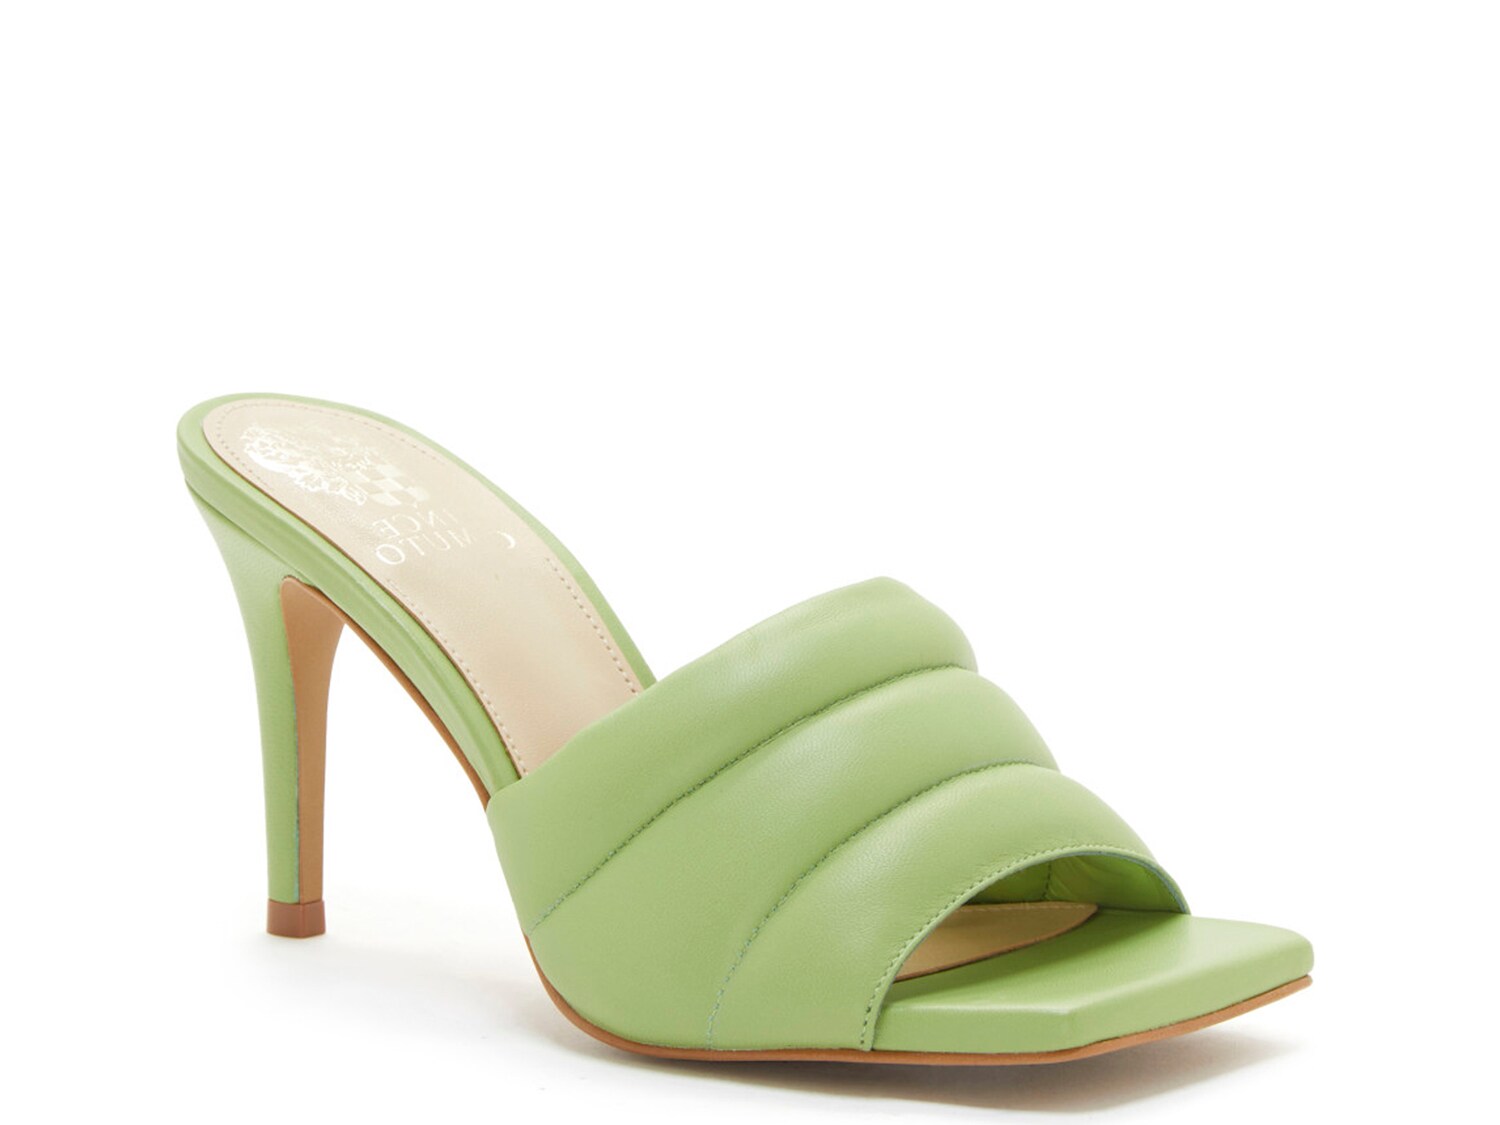 Vince Camuto Candreia Sandal - Free Shipping | DSW